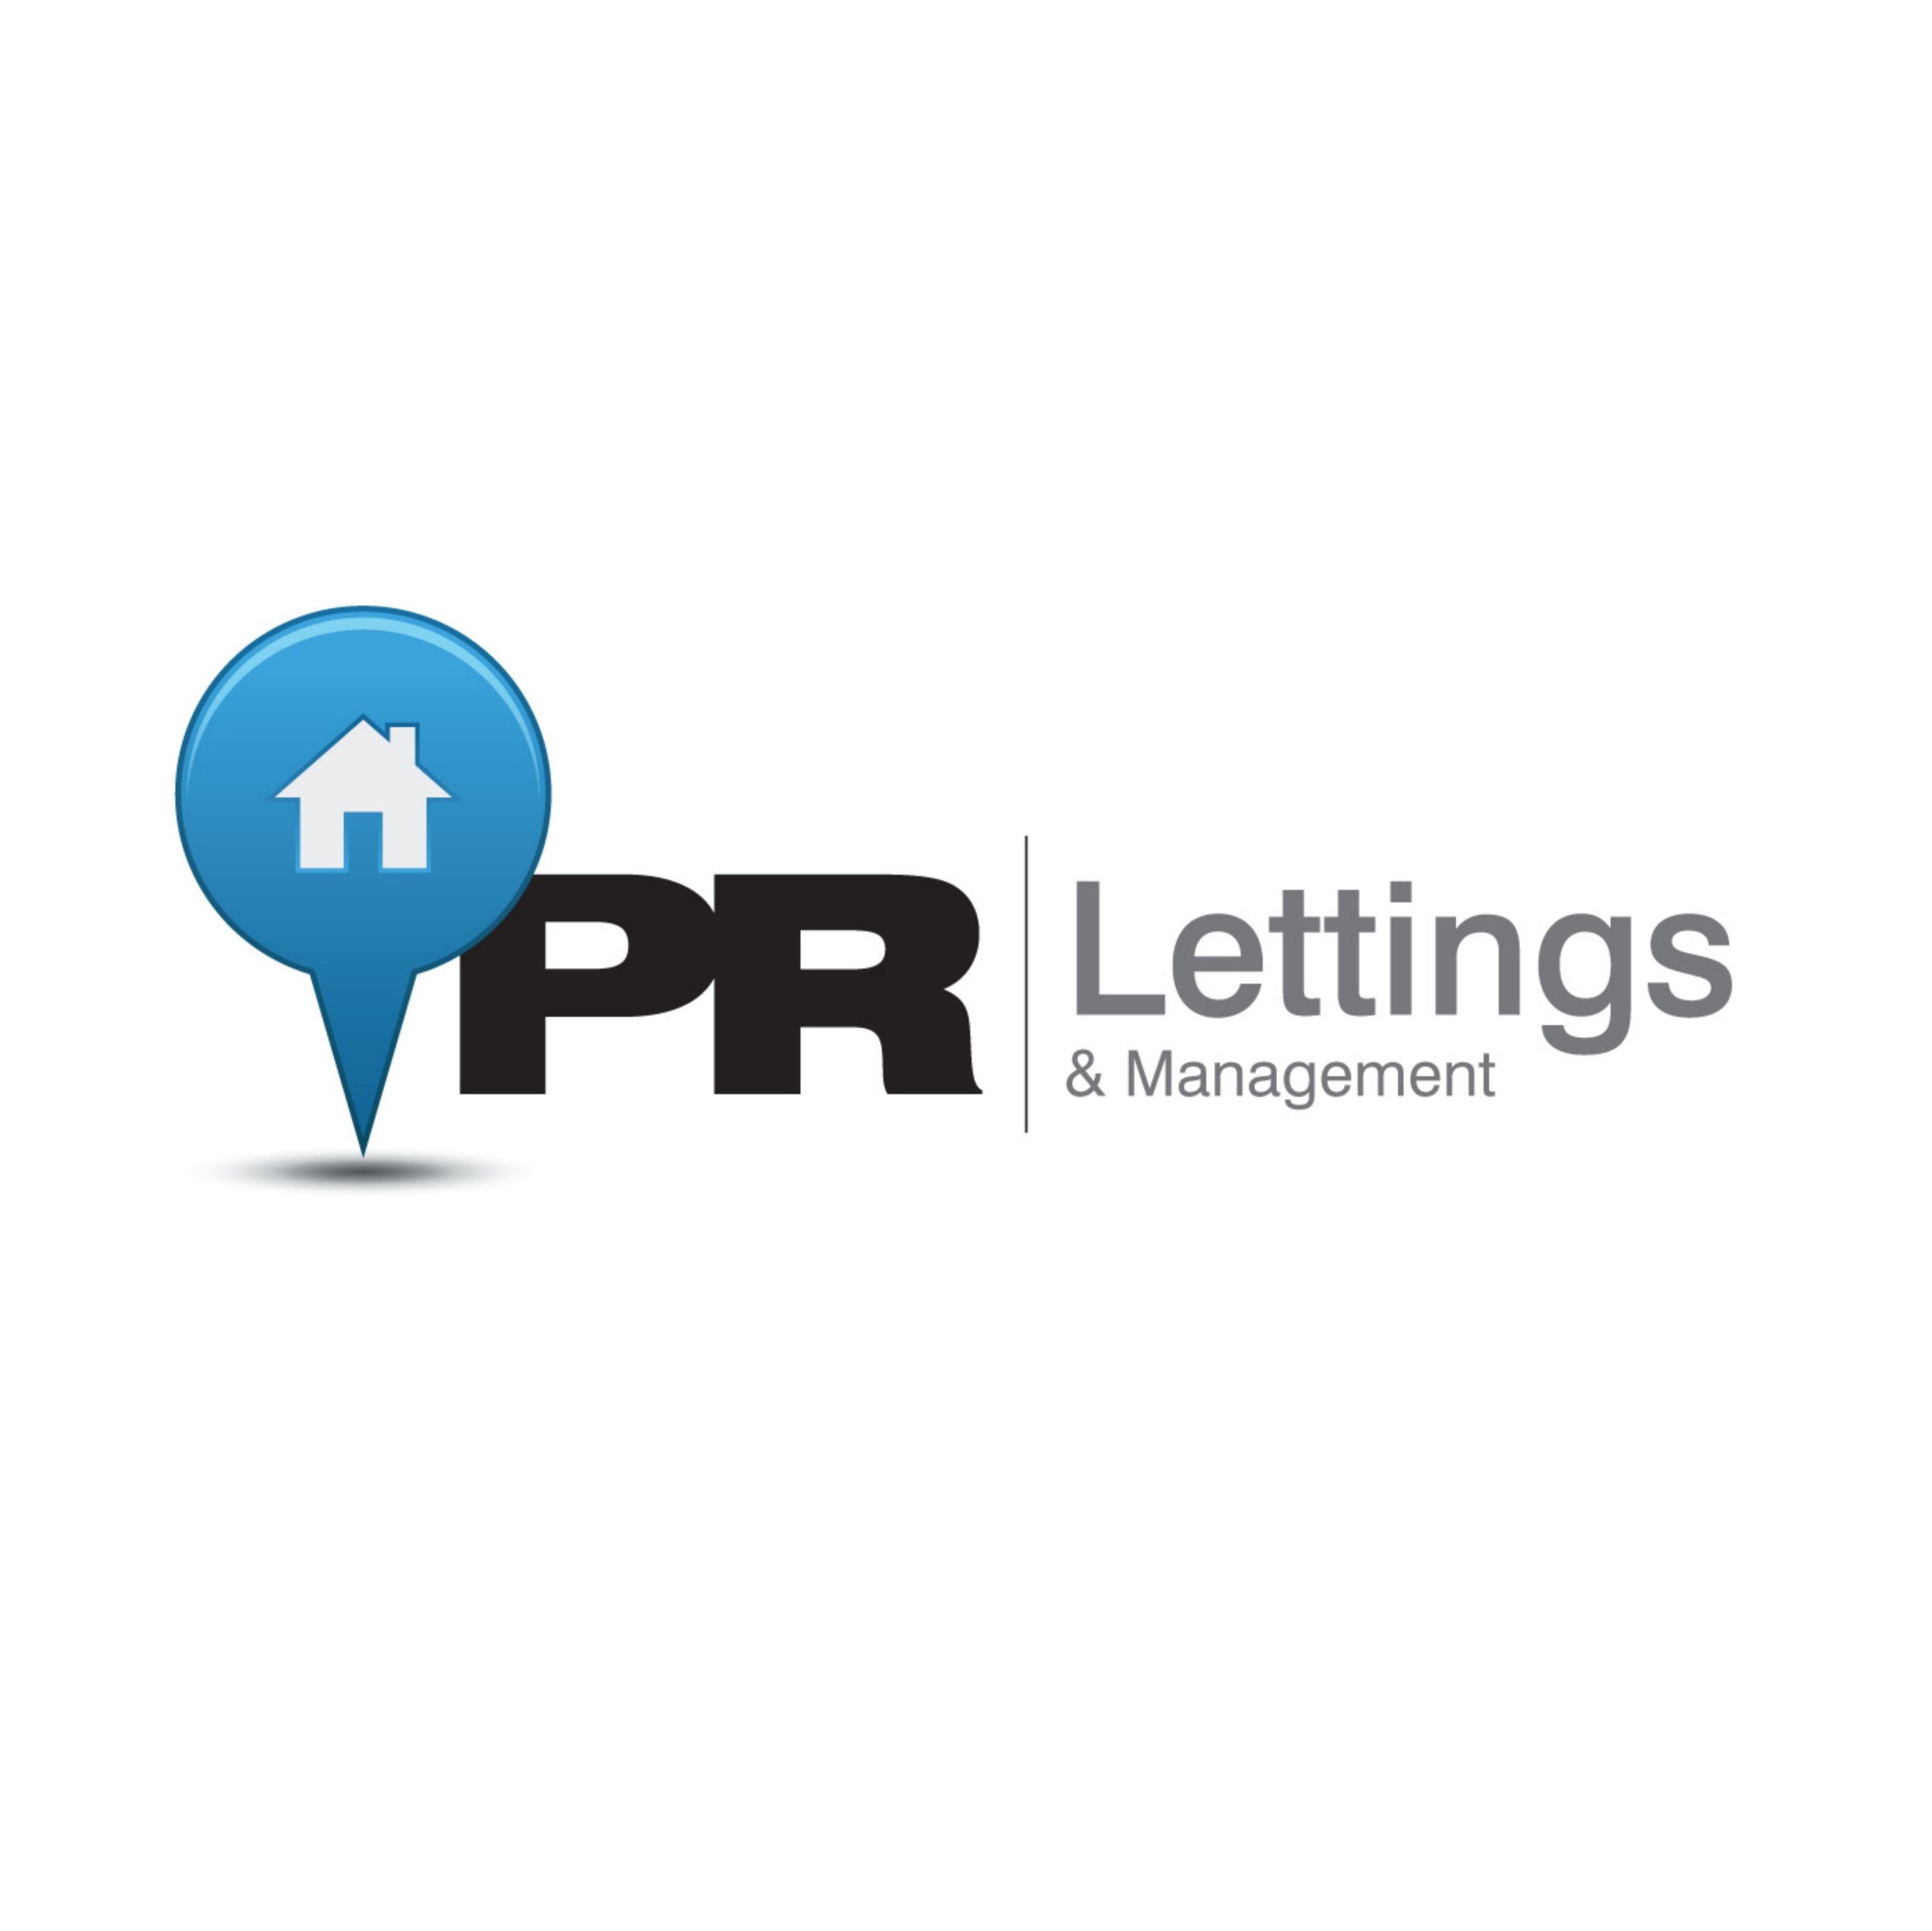 PR Lettings & Management delivers a highly professional residential letting and management service to Landlords and Tenants in the Preston, Leyland & Chorley.